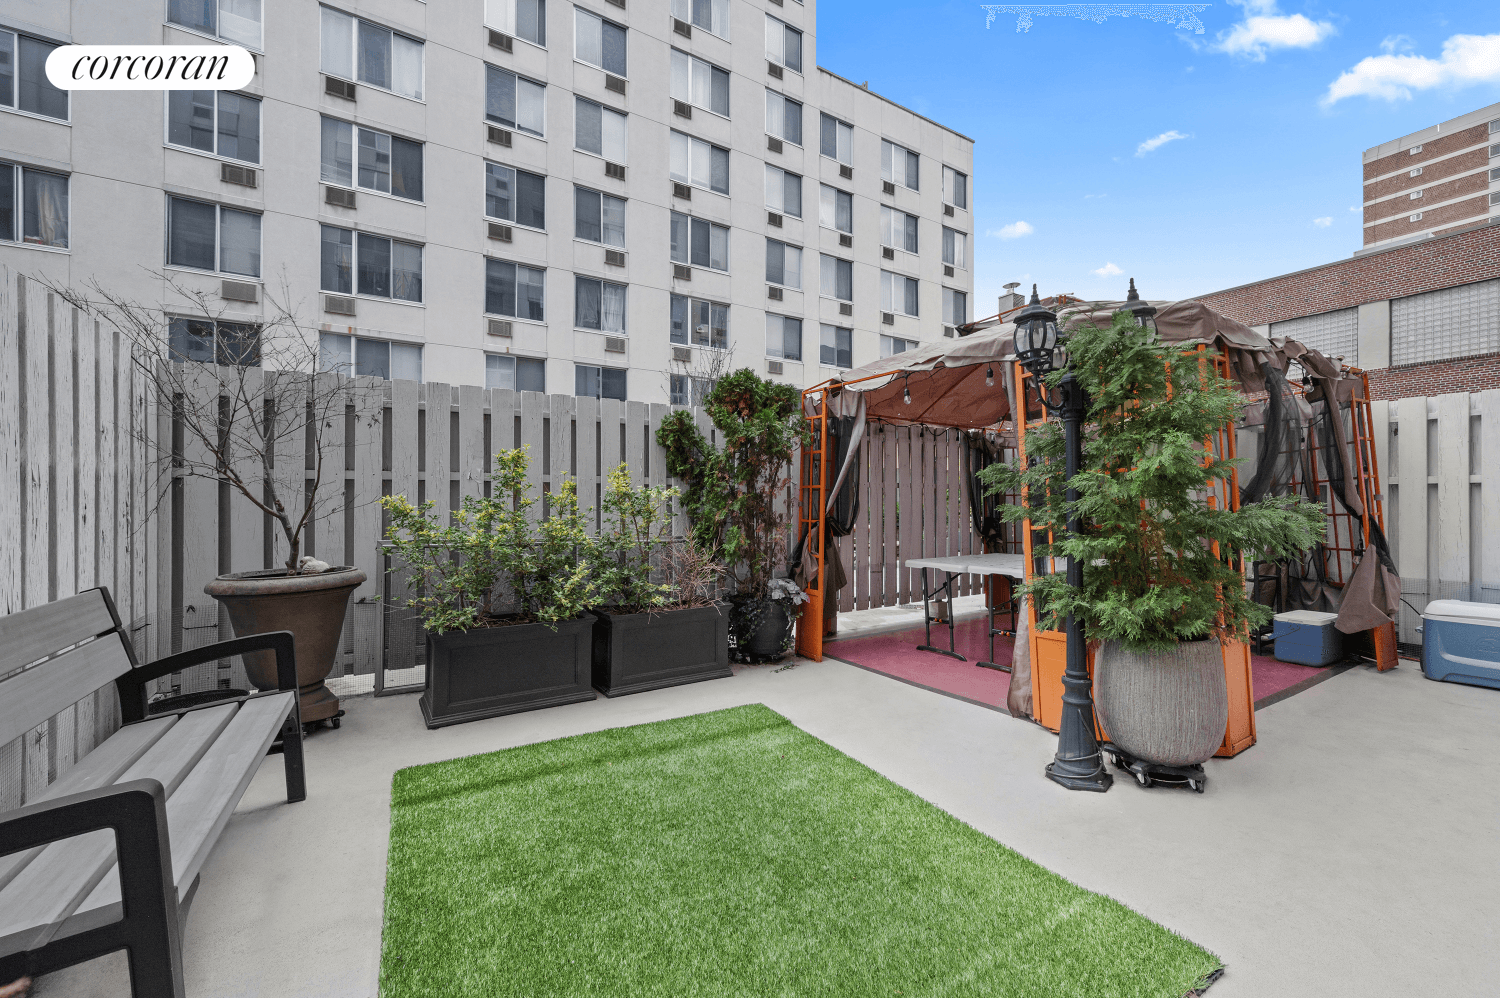 BACK ON THE MARKET ! ! Behold the elegant and captivating garden duplex, unit 1C, situated in the majestic Beacon Towers at 29 West 138th Street, right in the pulsating ...